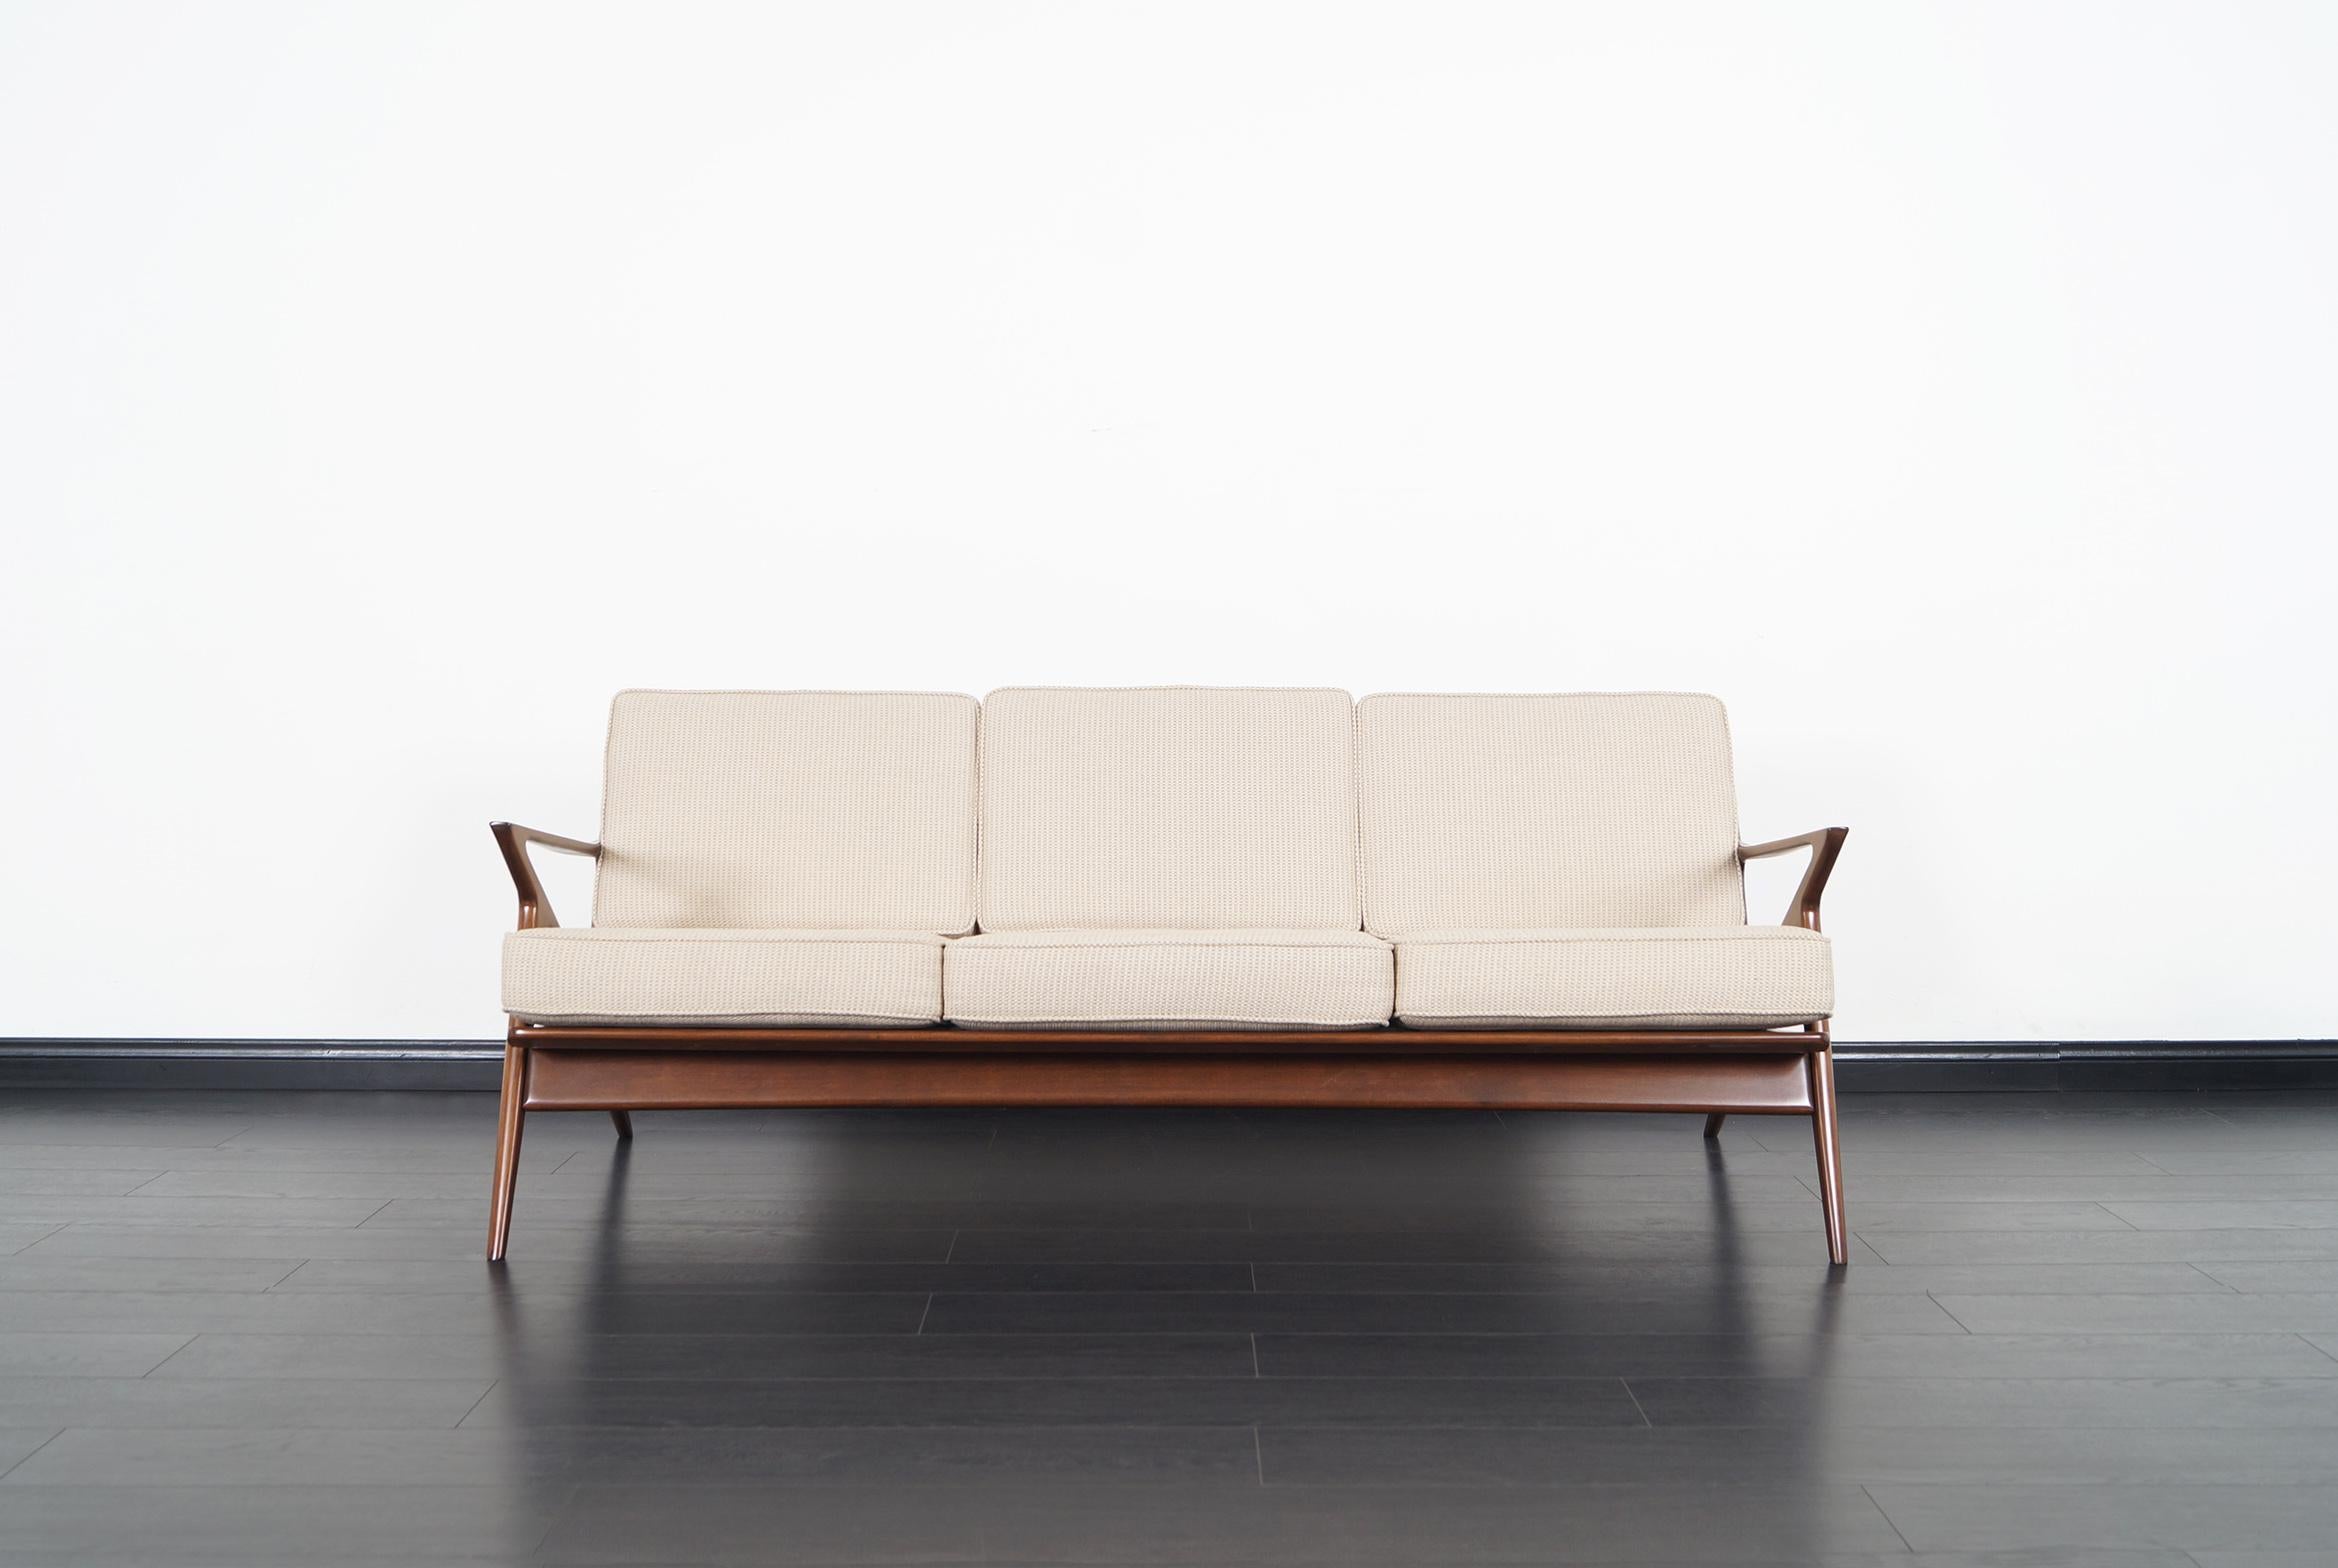 A Danish modern classic sofa designed by Poul Jensen for Selig. Known as the 